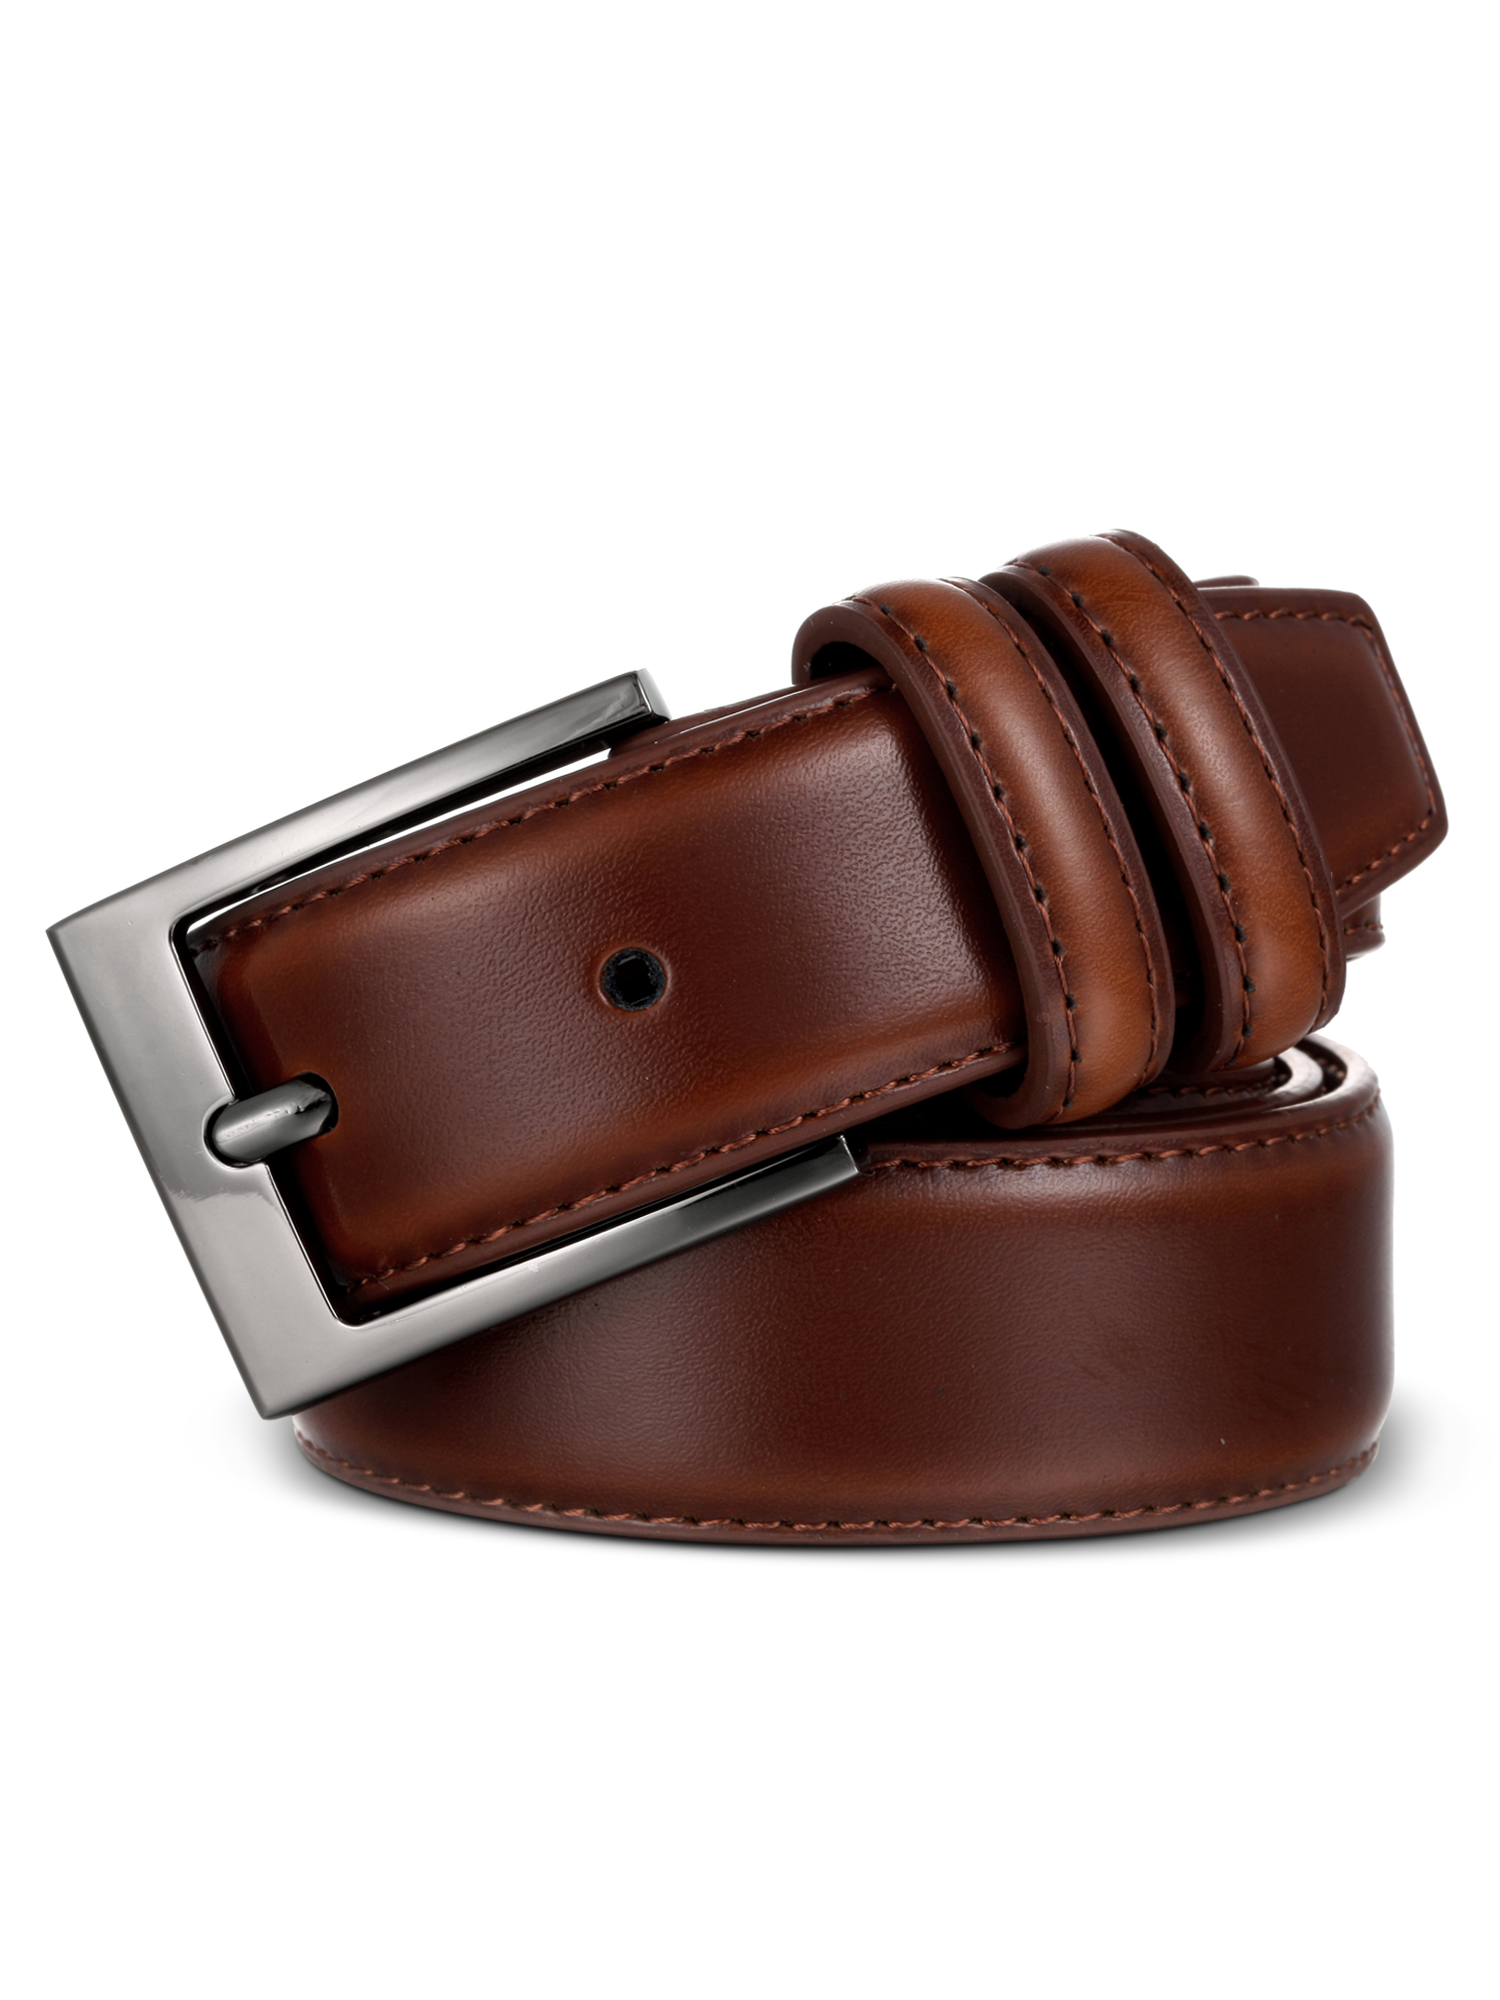 Marino’s Men Genuine Leather Dress Belt with Single Prong Buckle - Pack of 2 - image 4 of 6